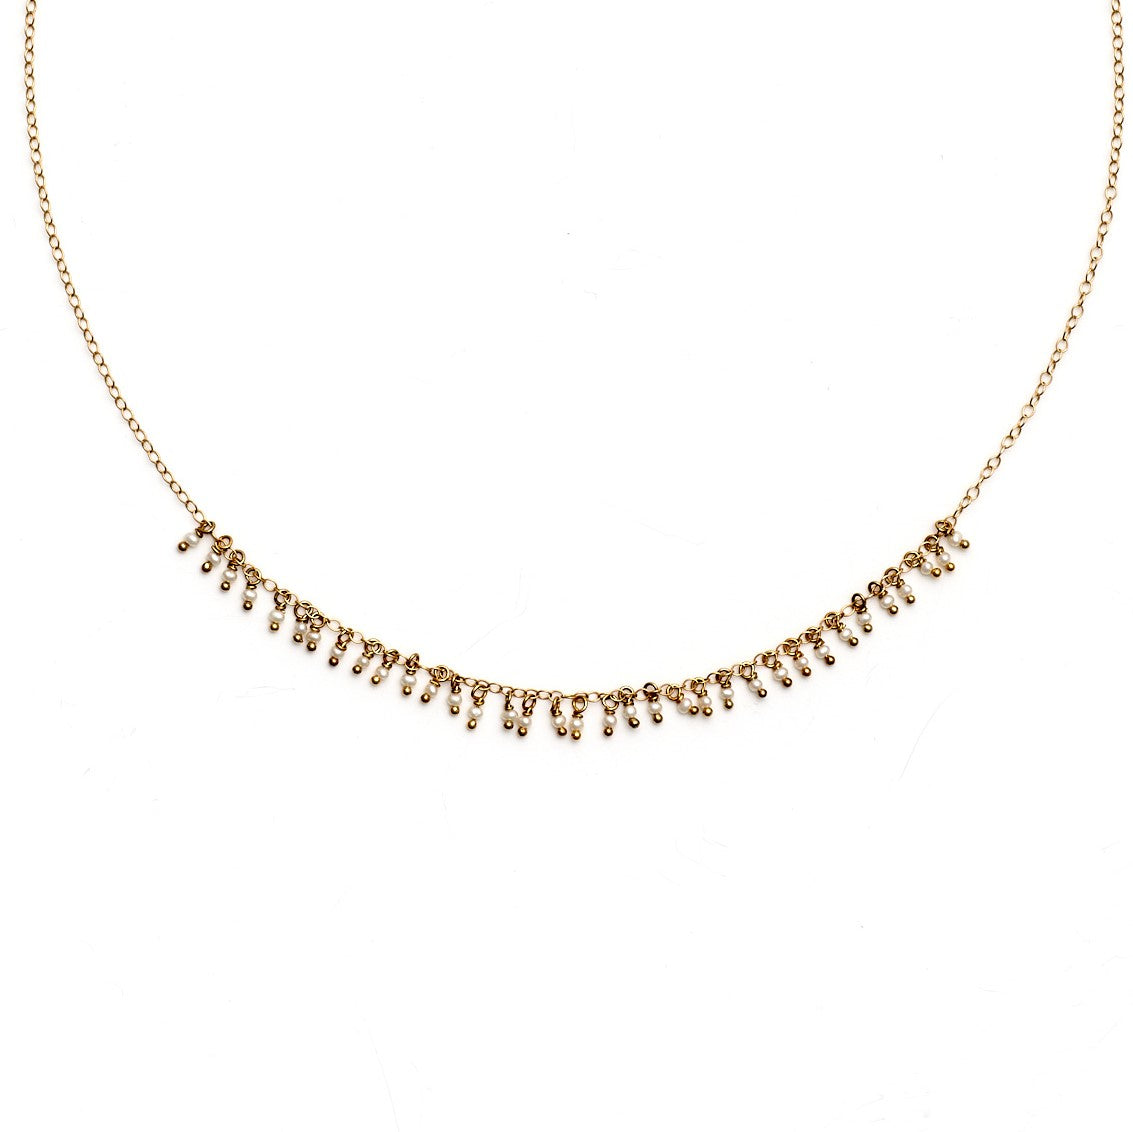 Miniature Seed Pearl Fringe Necklace